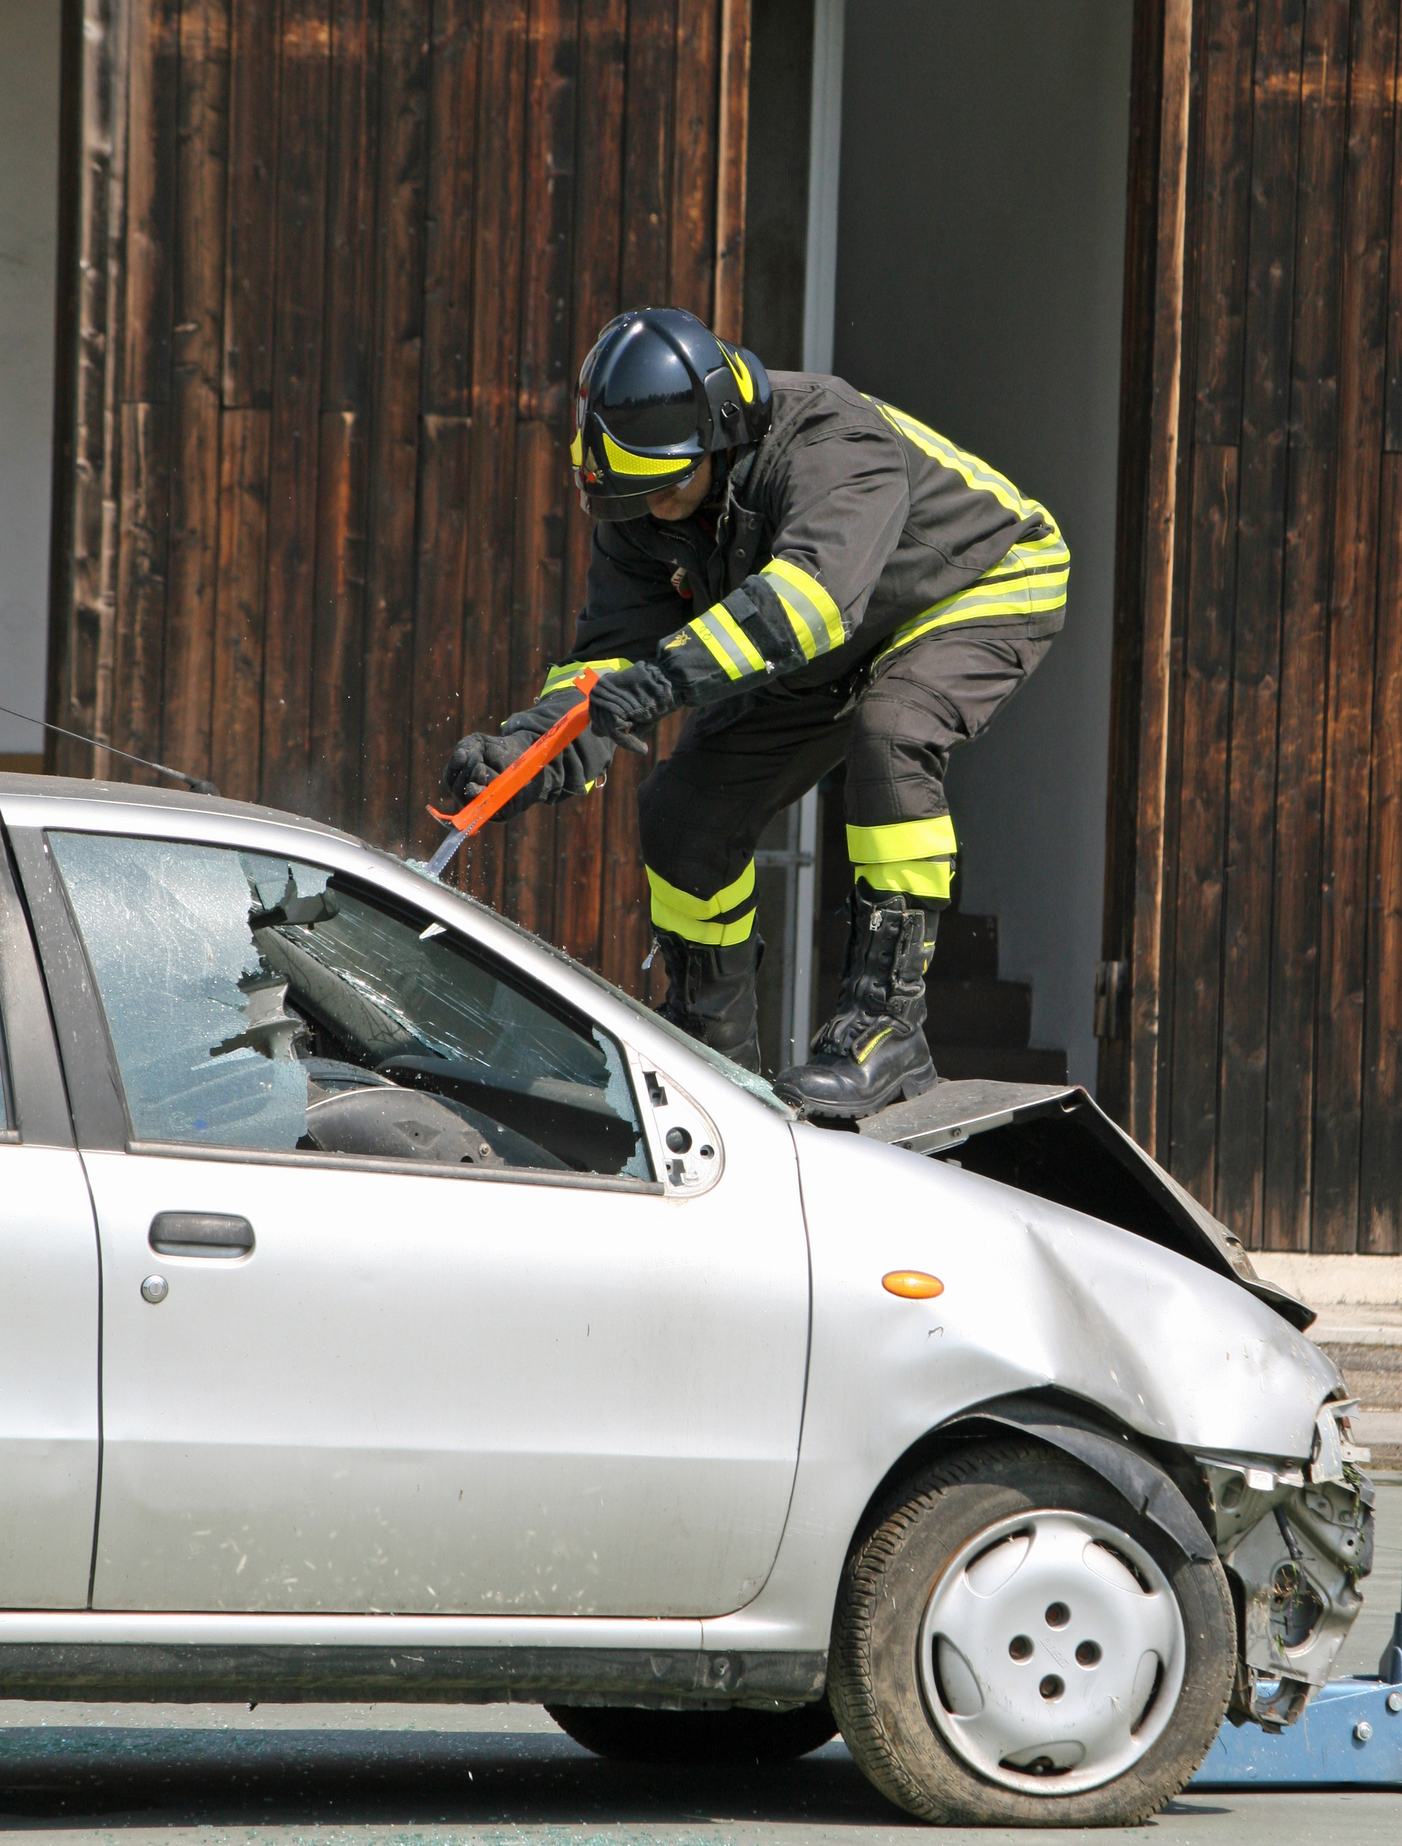 Useful and Usable Apps Hybrid Auto Extrication Guide Emergency Reporting